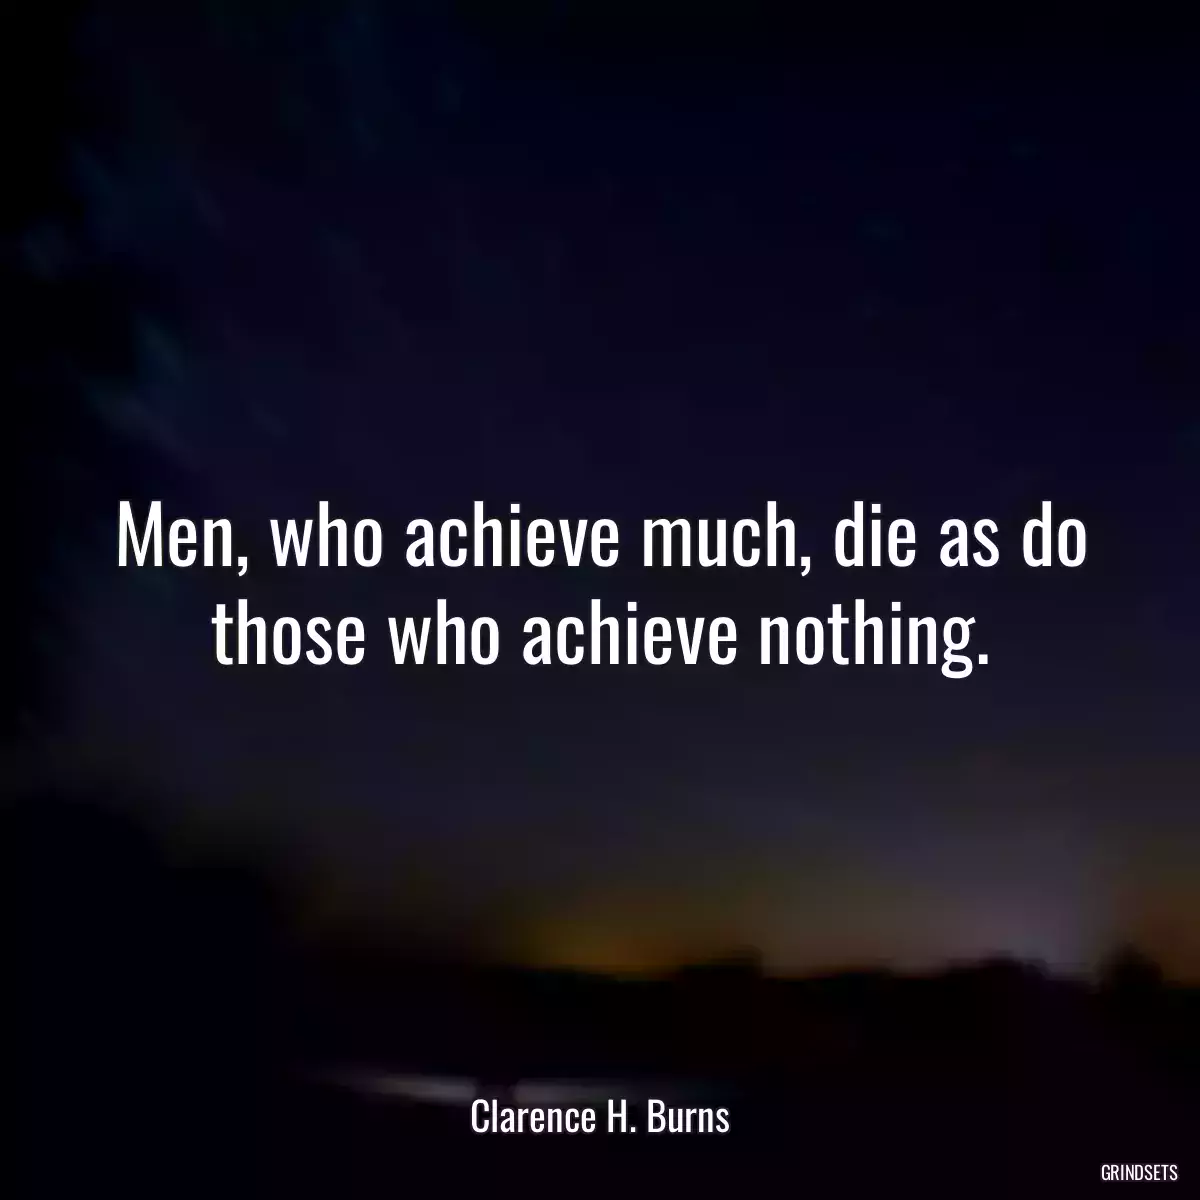 Men, who achieve much, die as do those who achieve nothing.